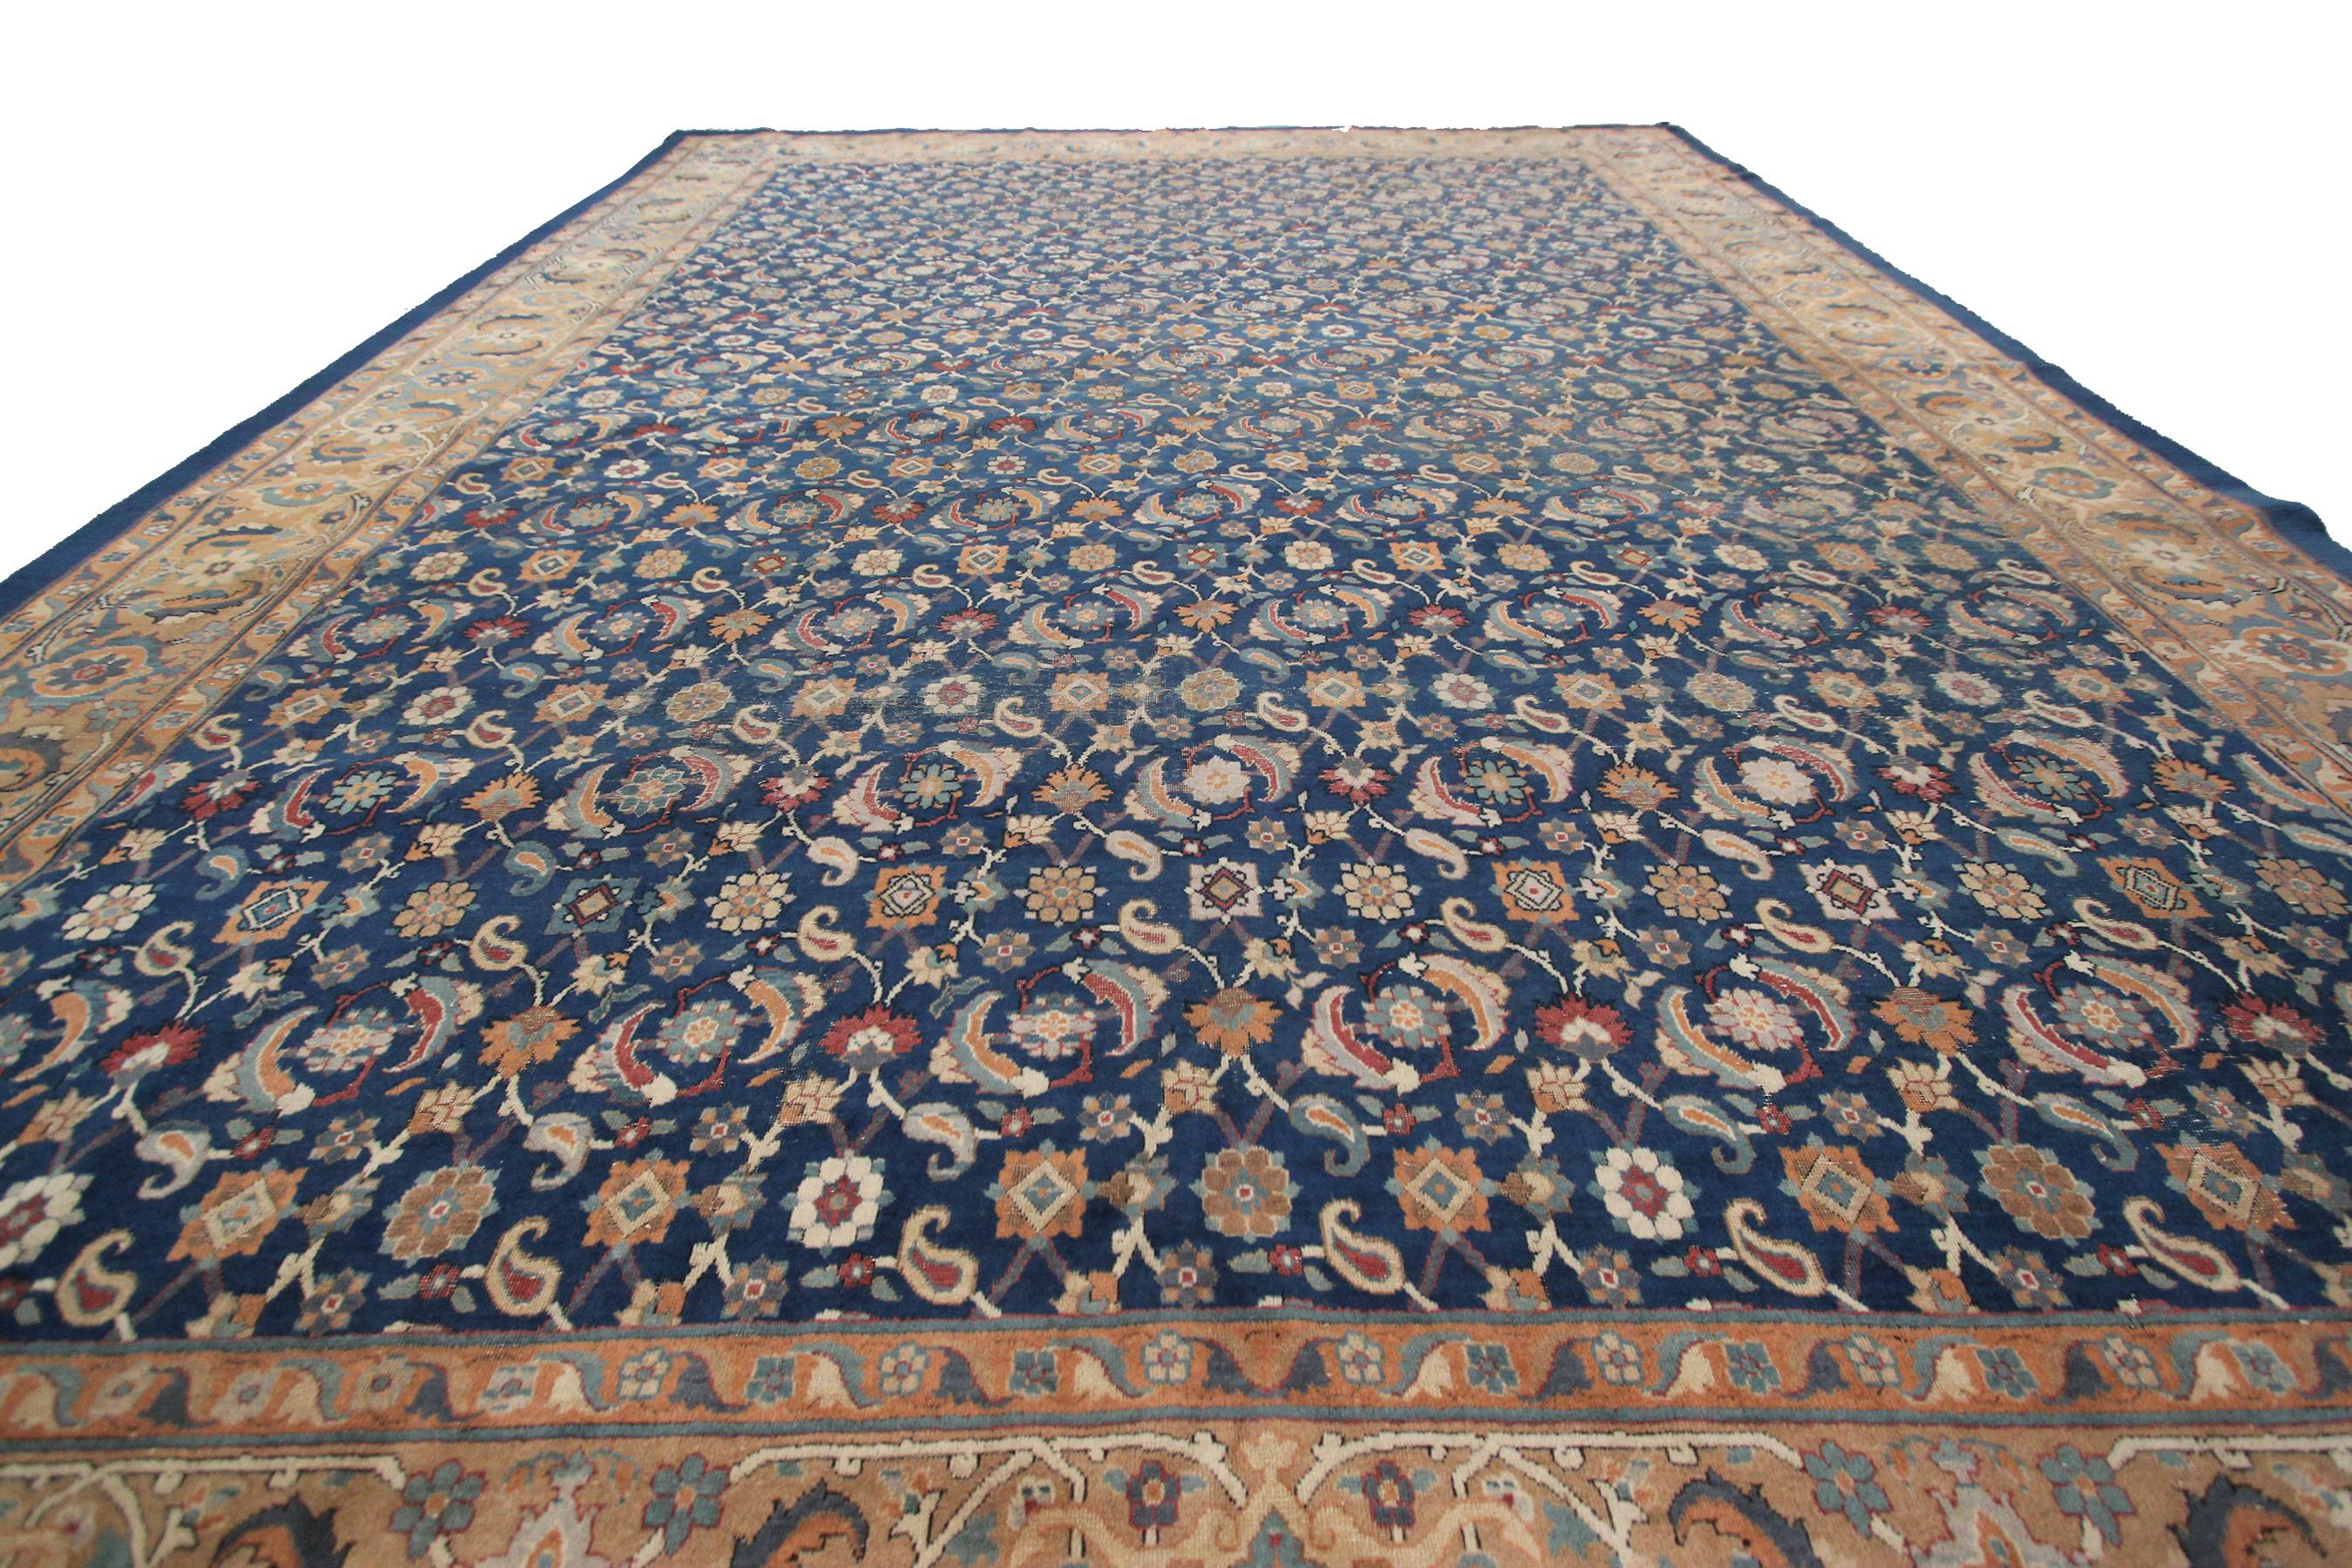 Chinese 1890 Antique Agra Rug Antique Agra Amritsar Handmade Agra Rug Geometric For Sale